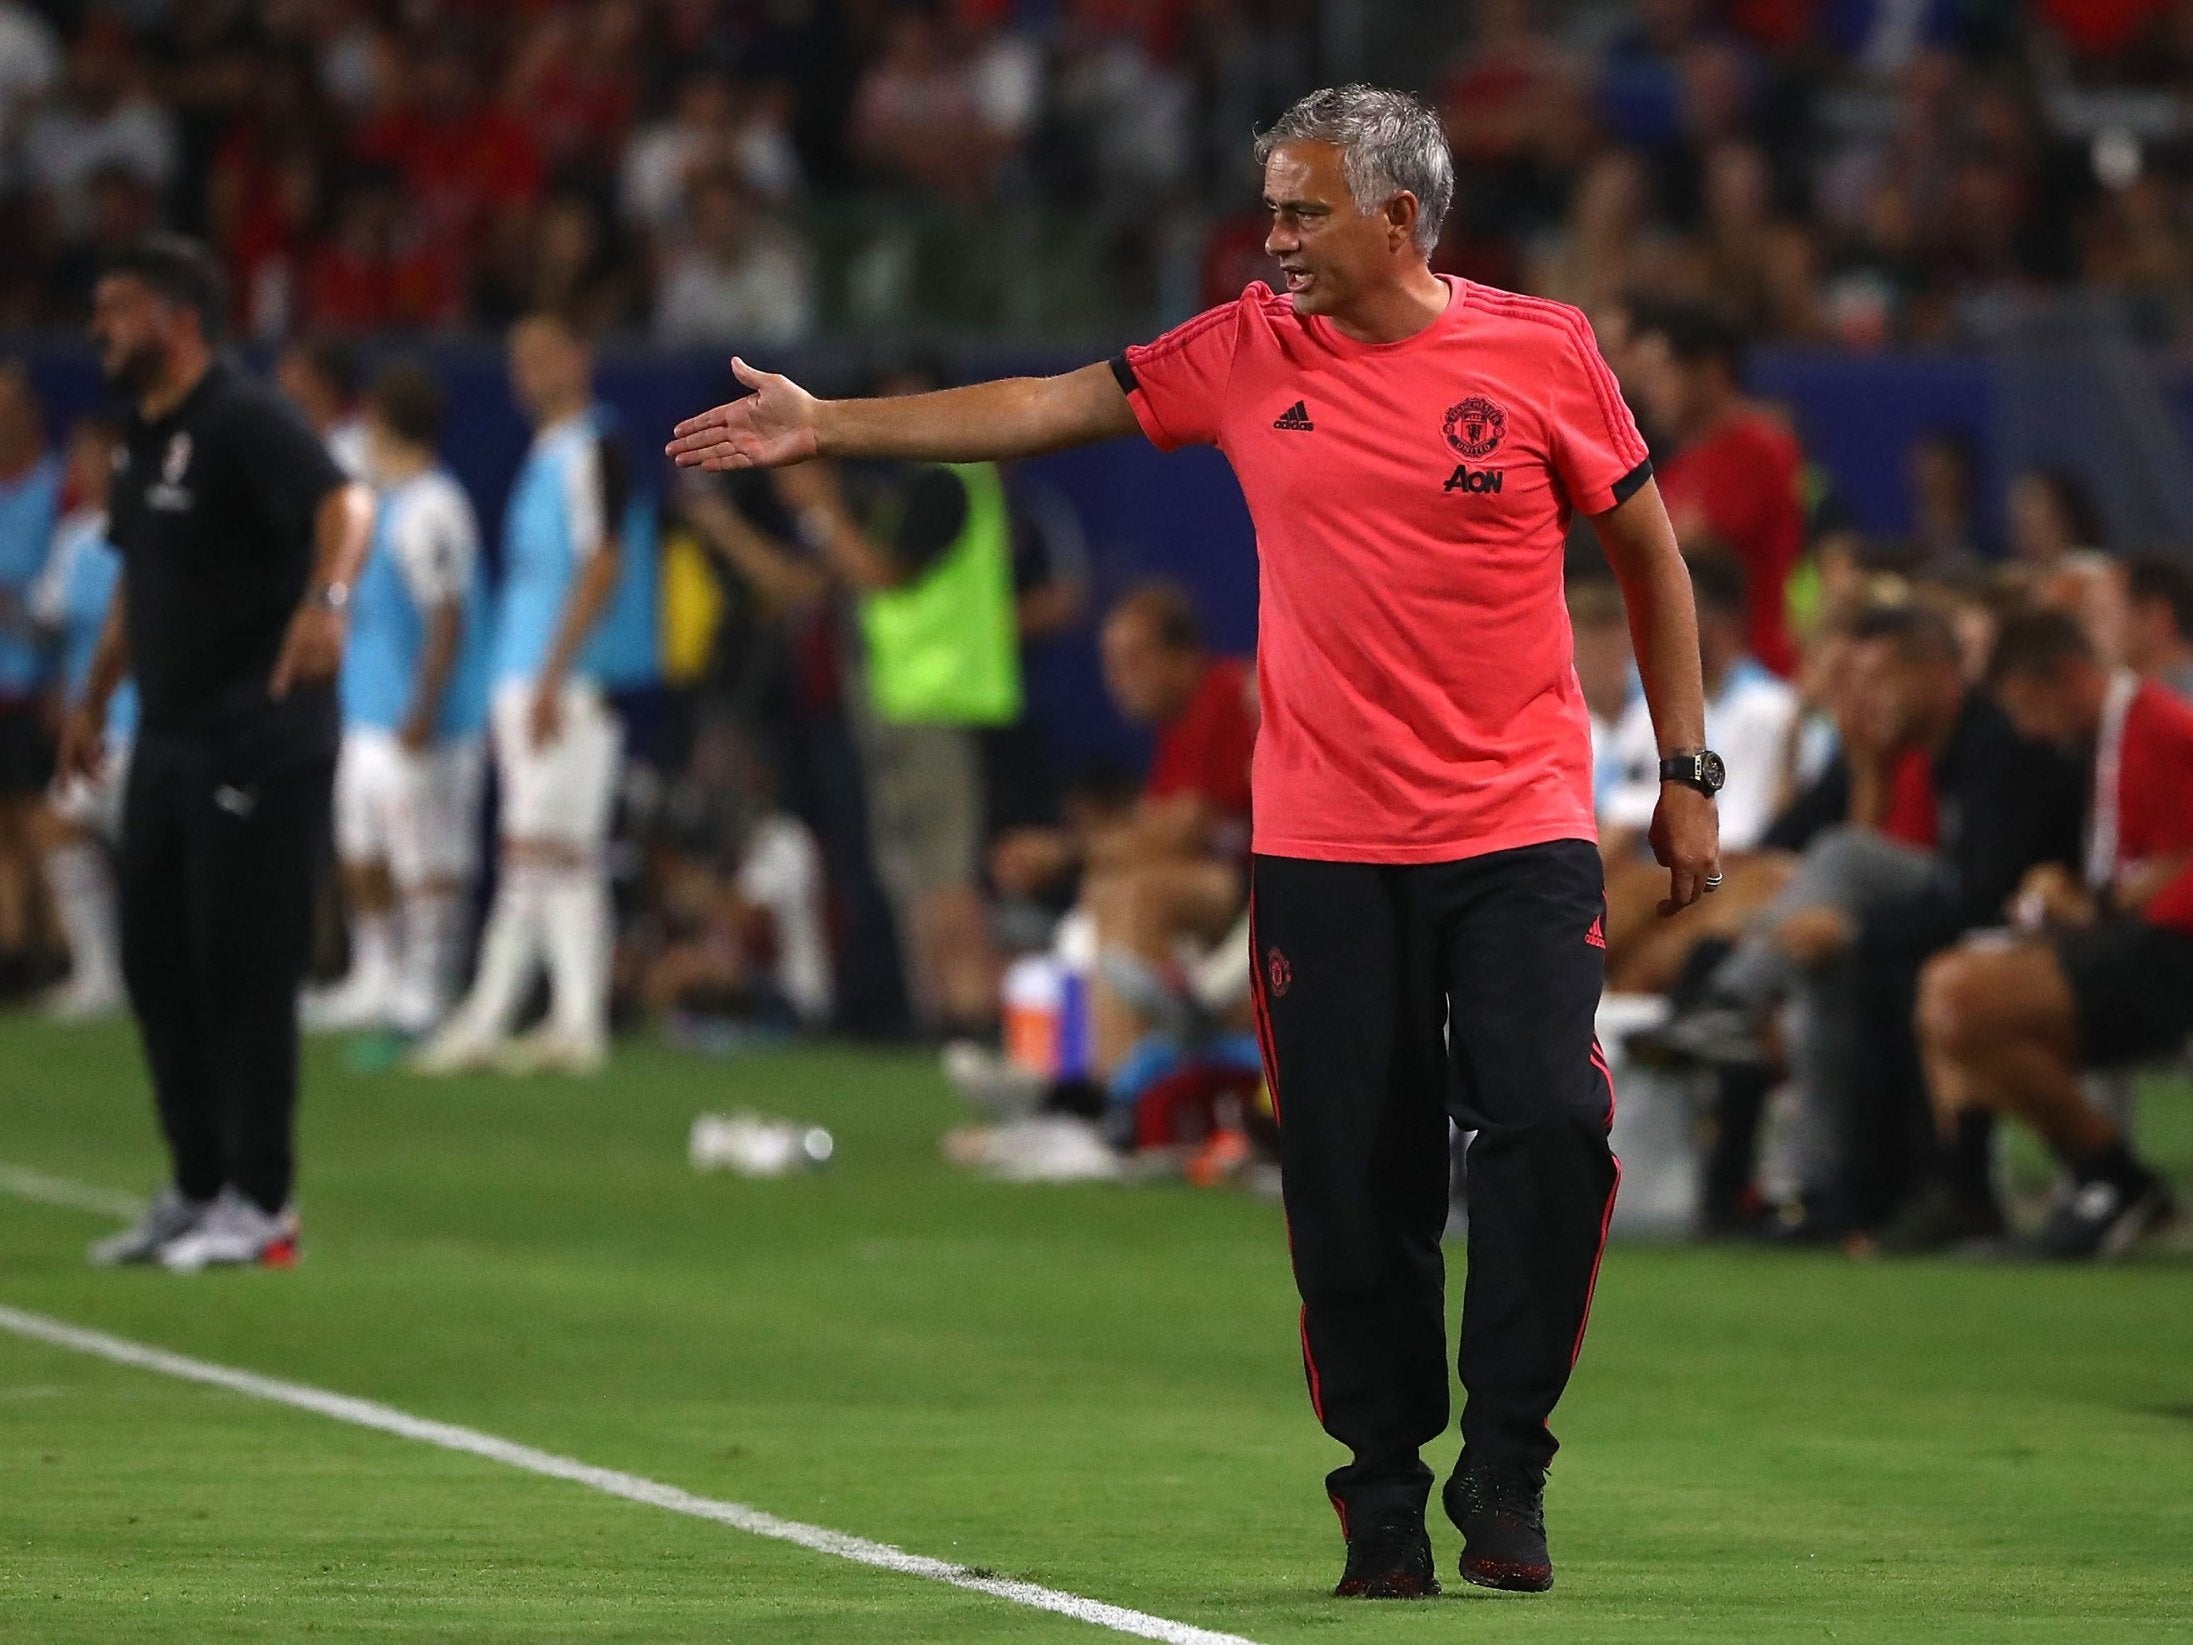 Jose Mourinho wants Ashley Young to return to pre-season training earlier than planned